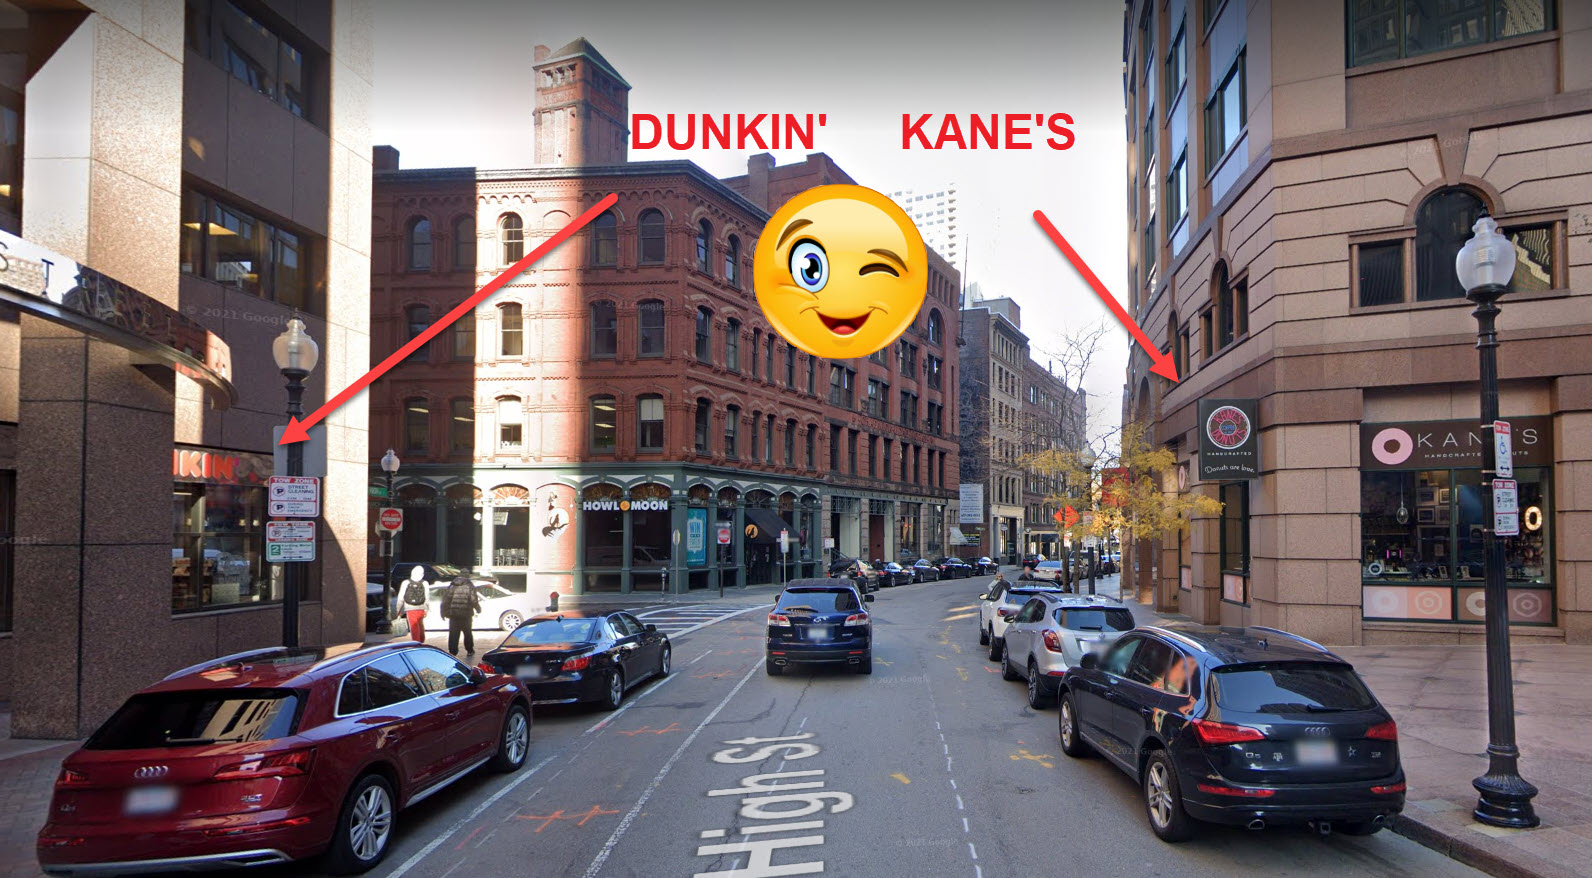 Kane's and Dunkin' across the street in Boston